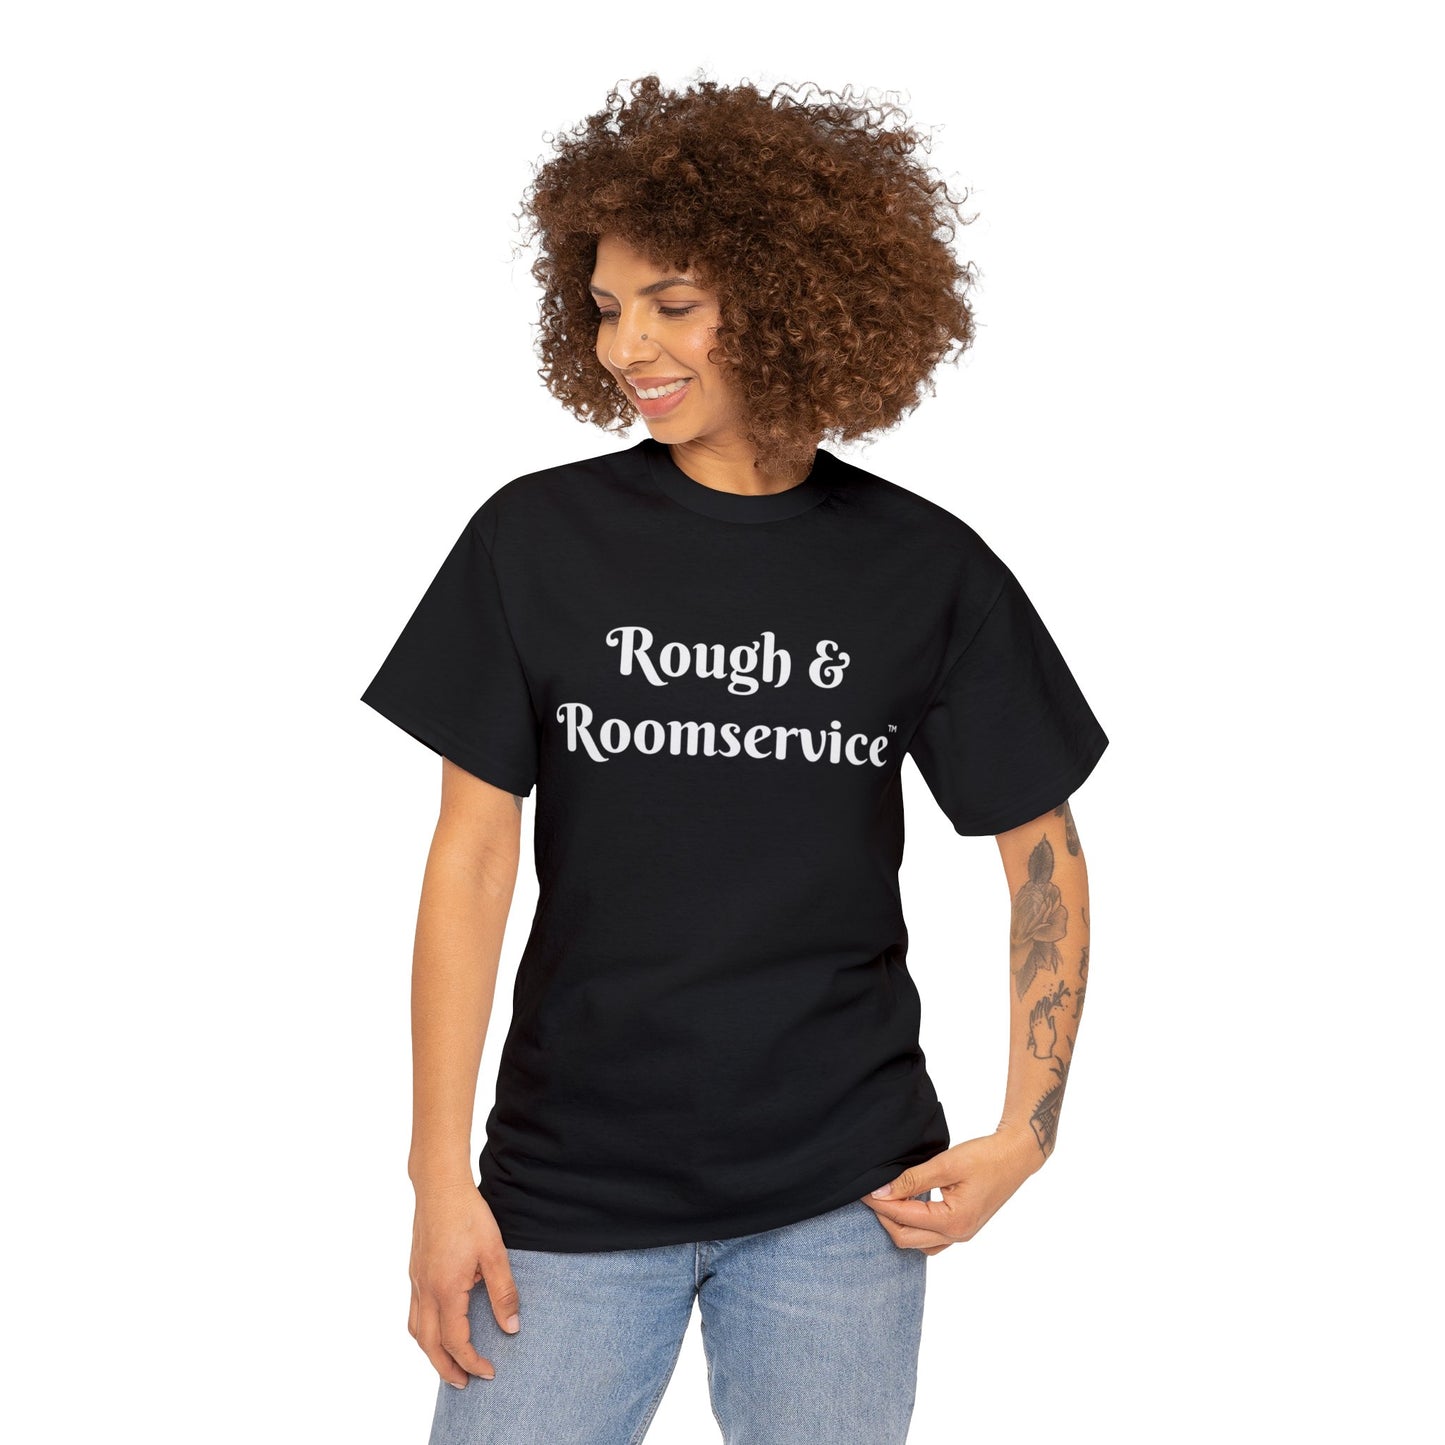 Bargain Tee "Rough & Roomservice"